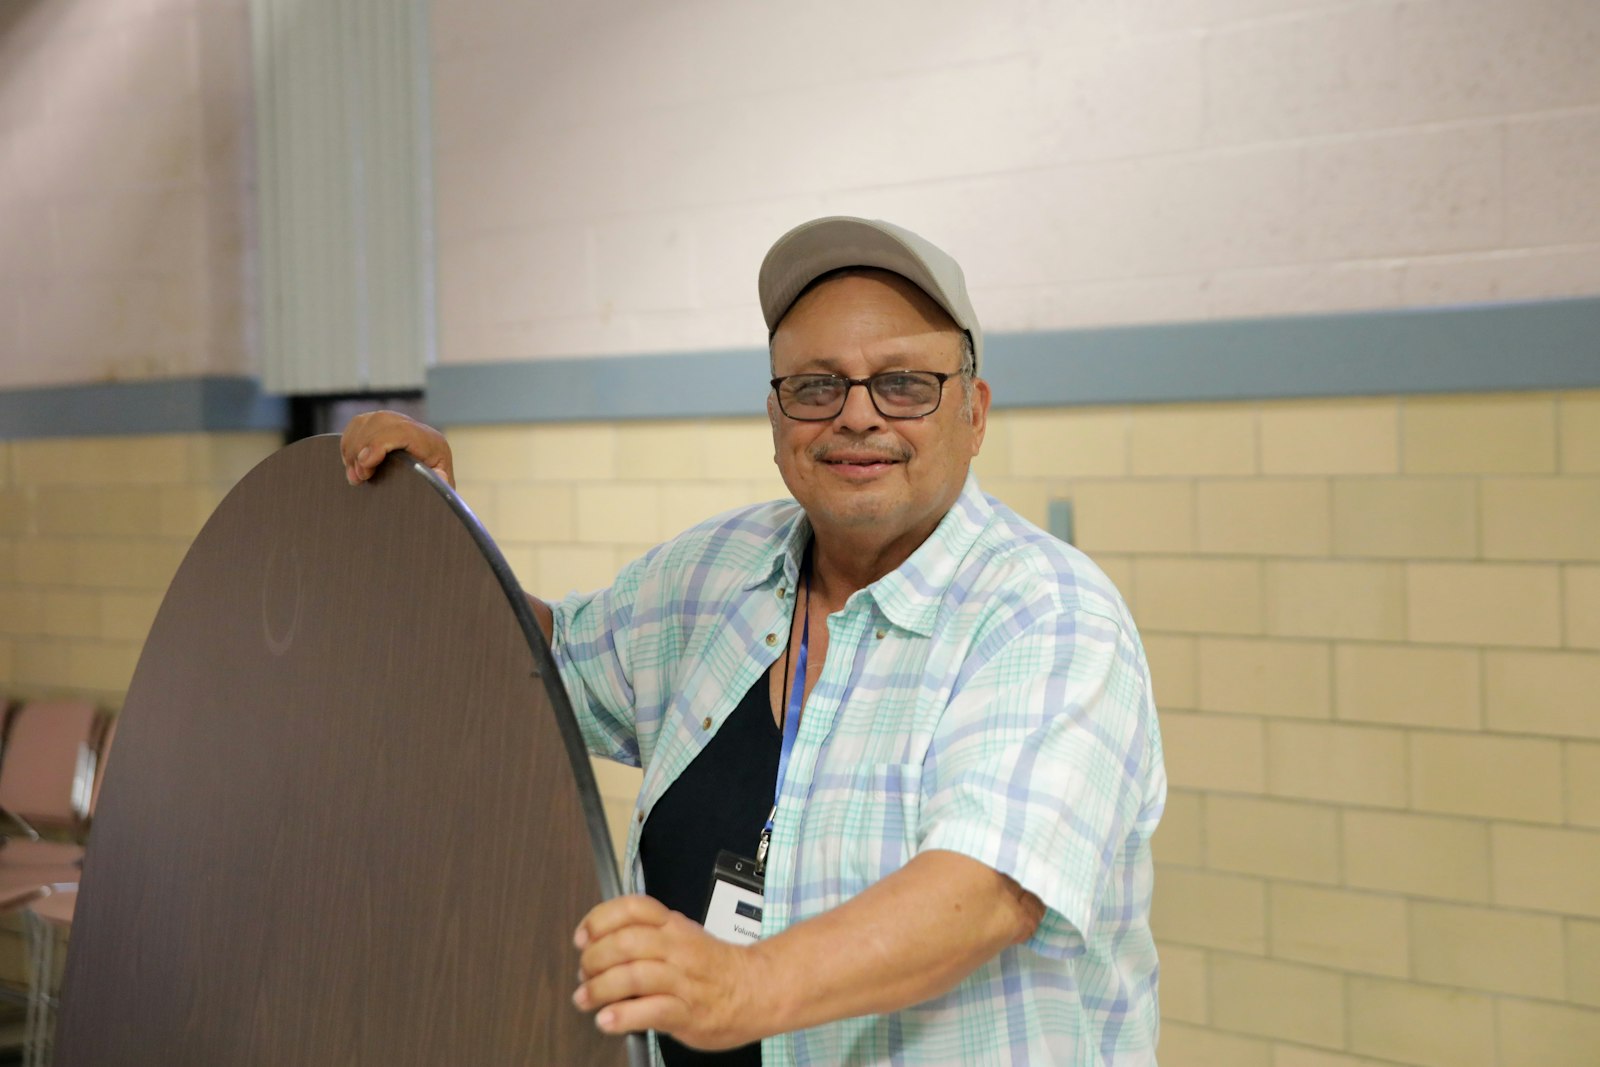 Ish Ledesma "Coach Ish" has been volunteering at the All Saint Soup Kitchen and Food Pantry for more than 10 years. Many former volunteers, All Saints alumni and former parishioners are volunteering at the new location in former St. Andrew gymnasium.